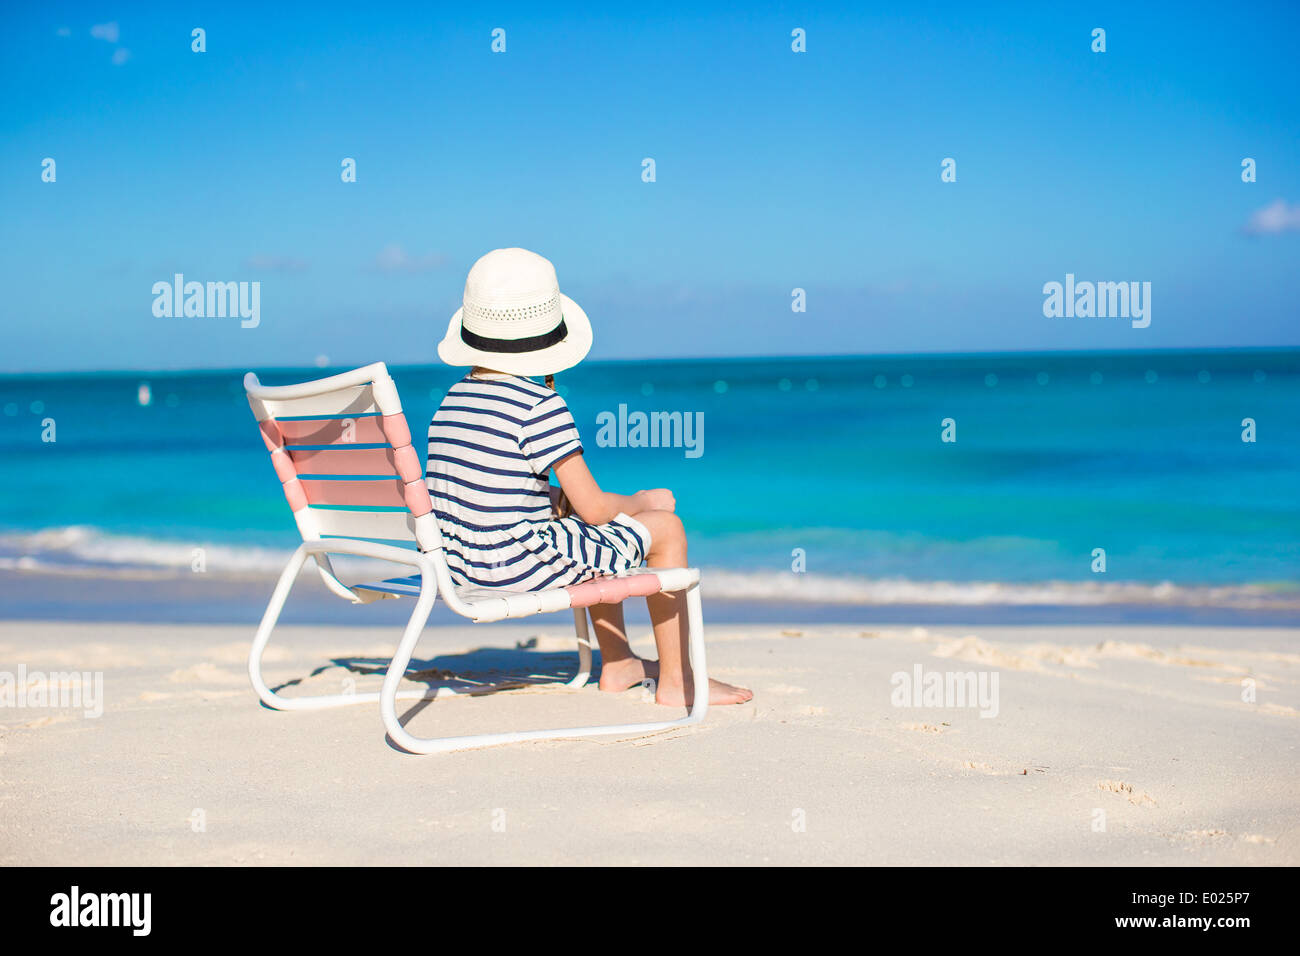 Little Cute Girl In Beach Chair Relax On Caribbean Vacation Stock